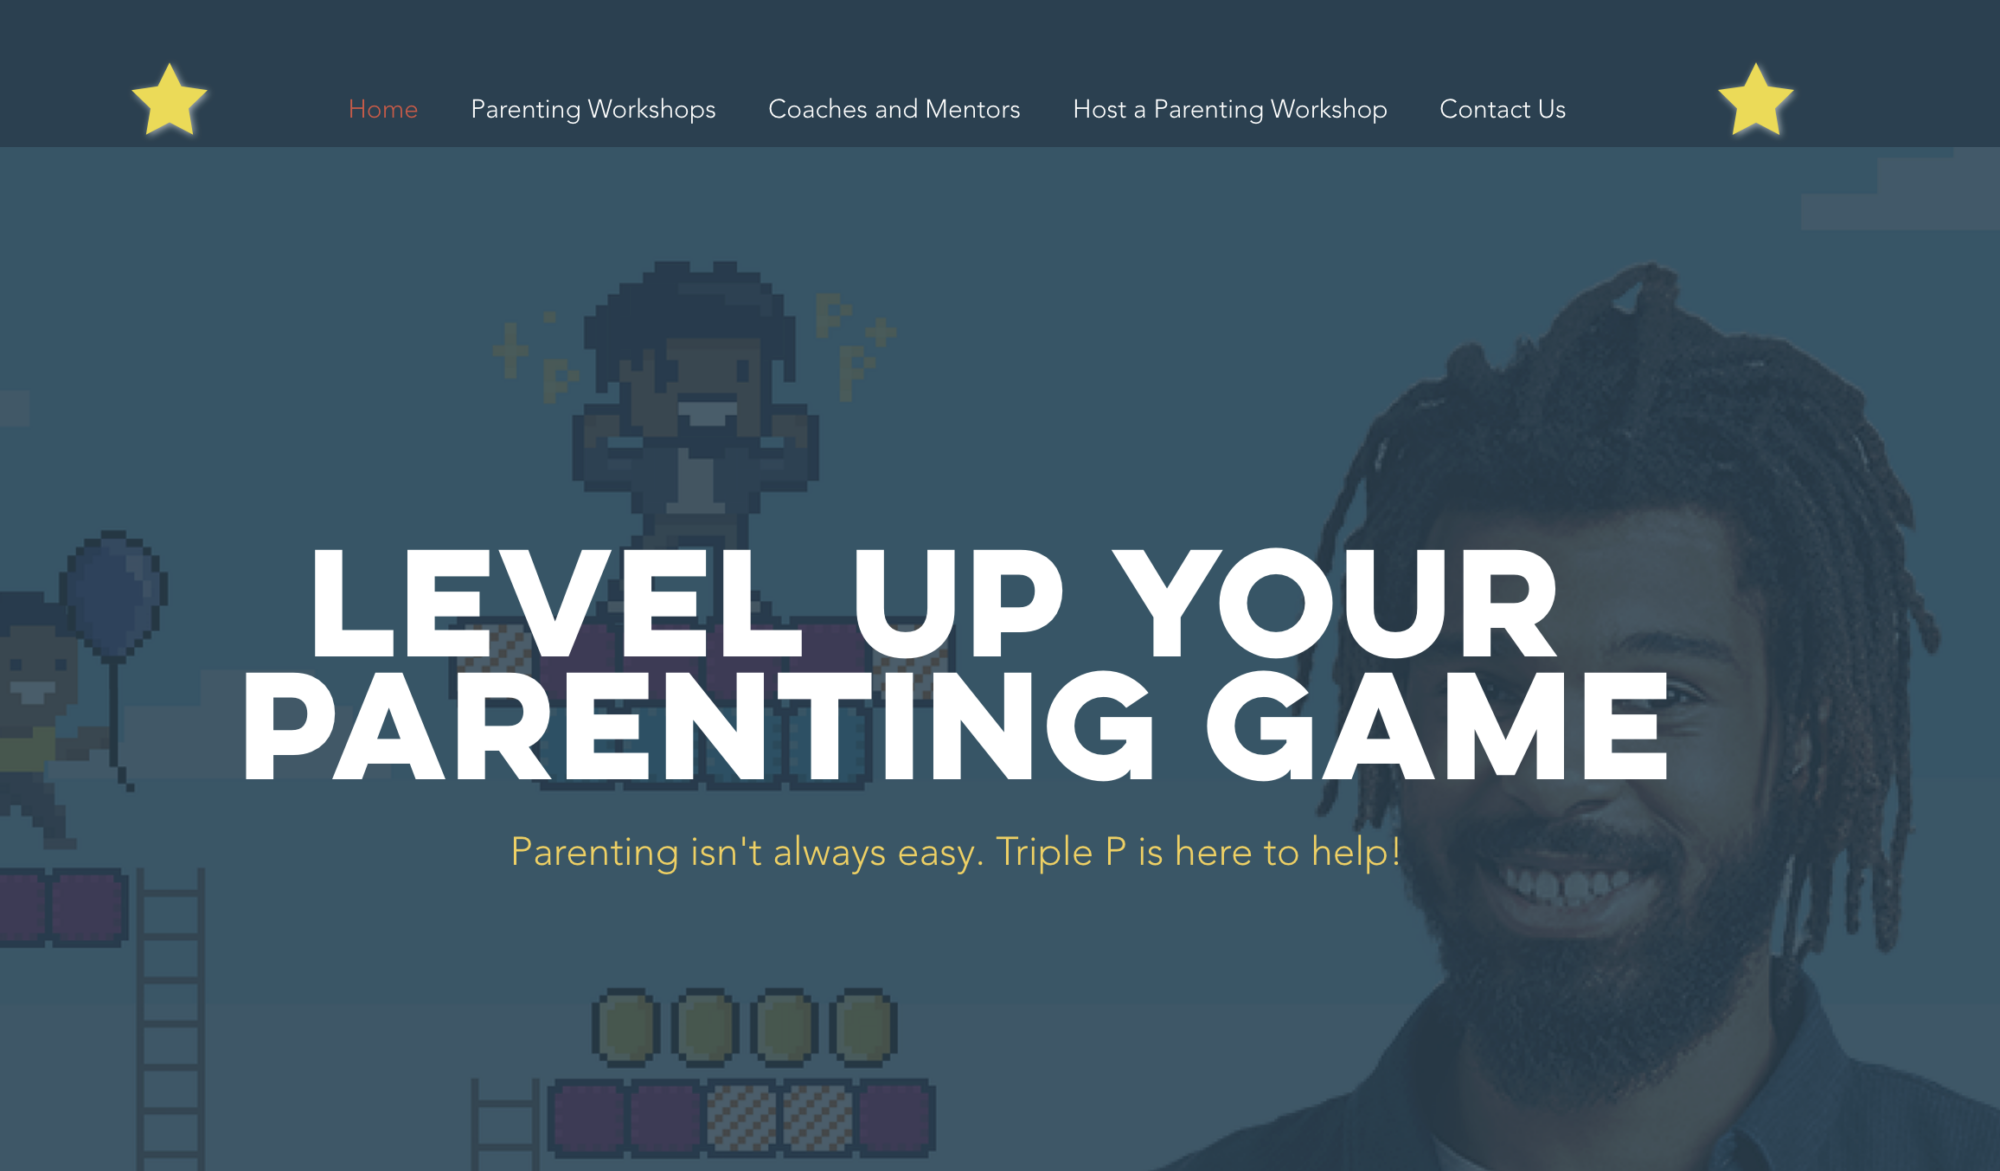 Visit GreenvilleParents.com to learn more